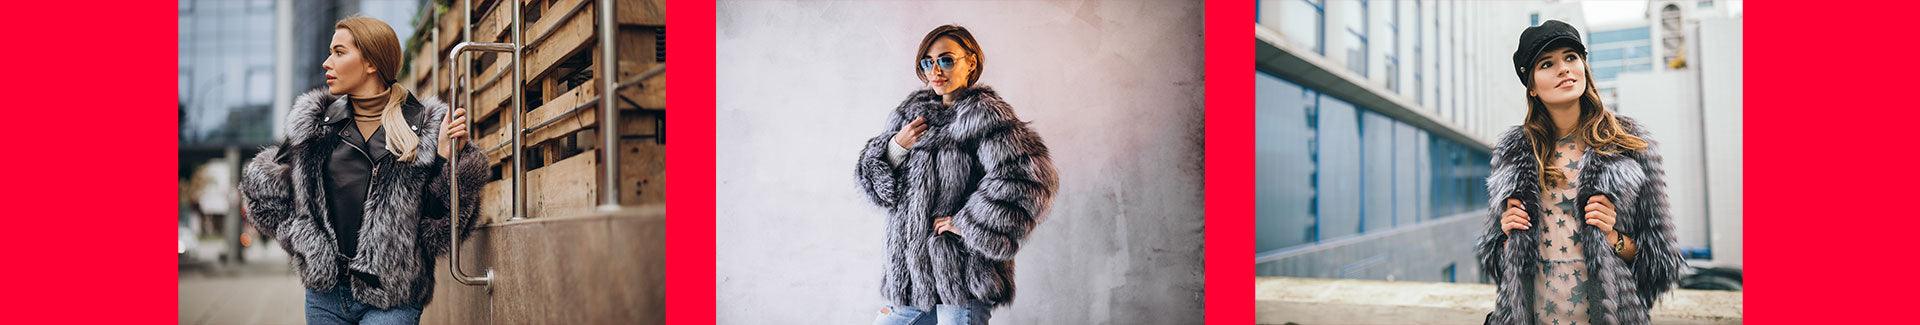 Luxurious and Cozy Women's Faux Fur Jackets Online - Daily Fashion